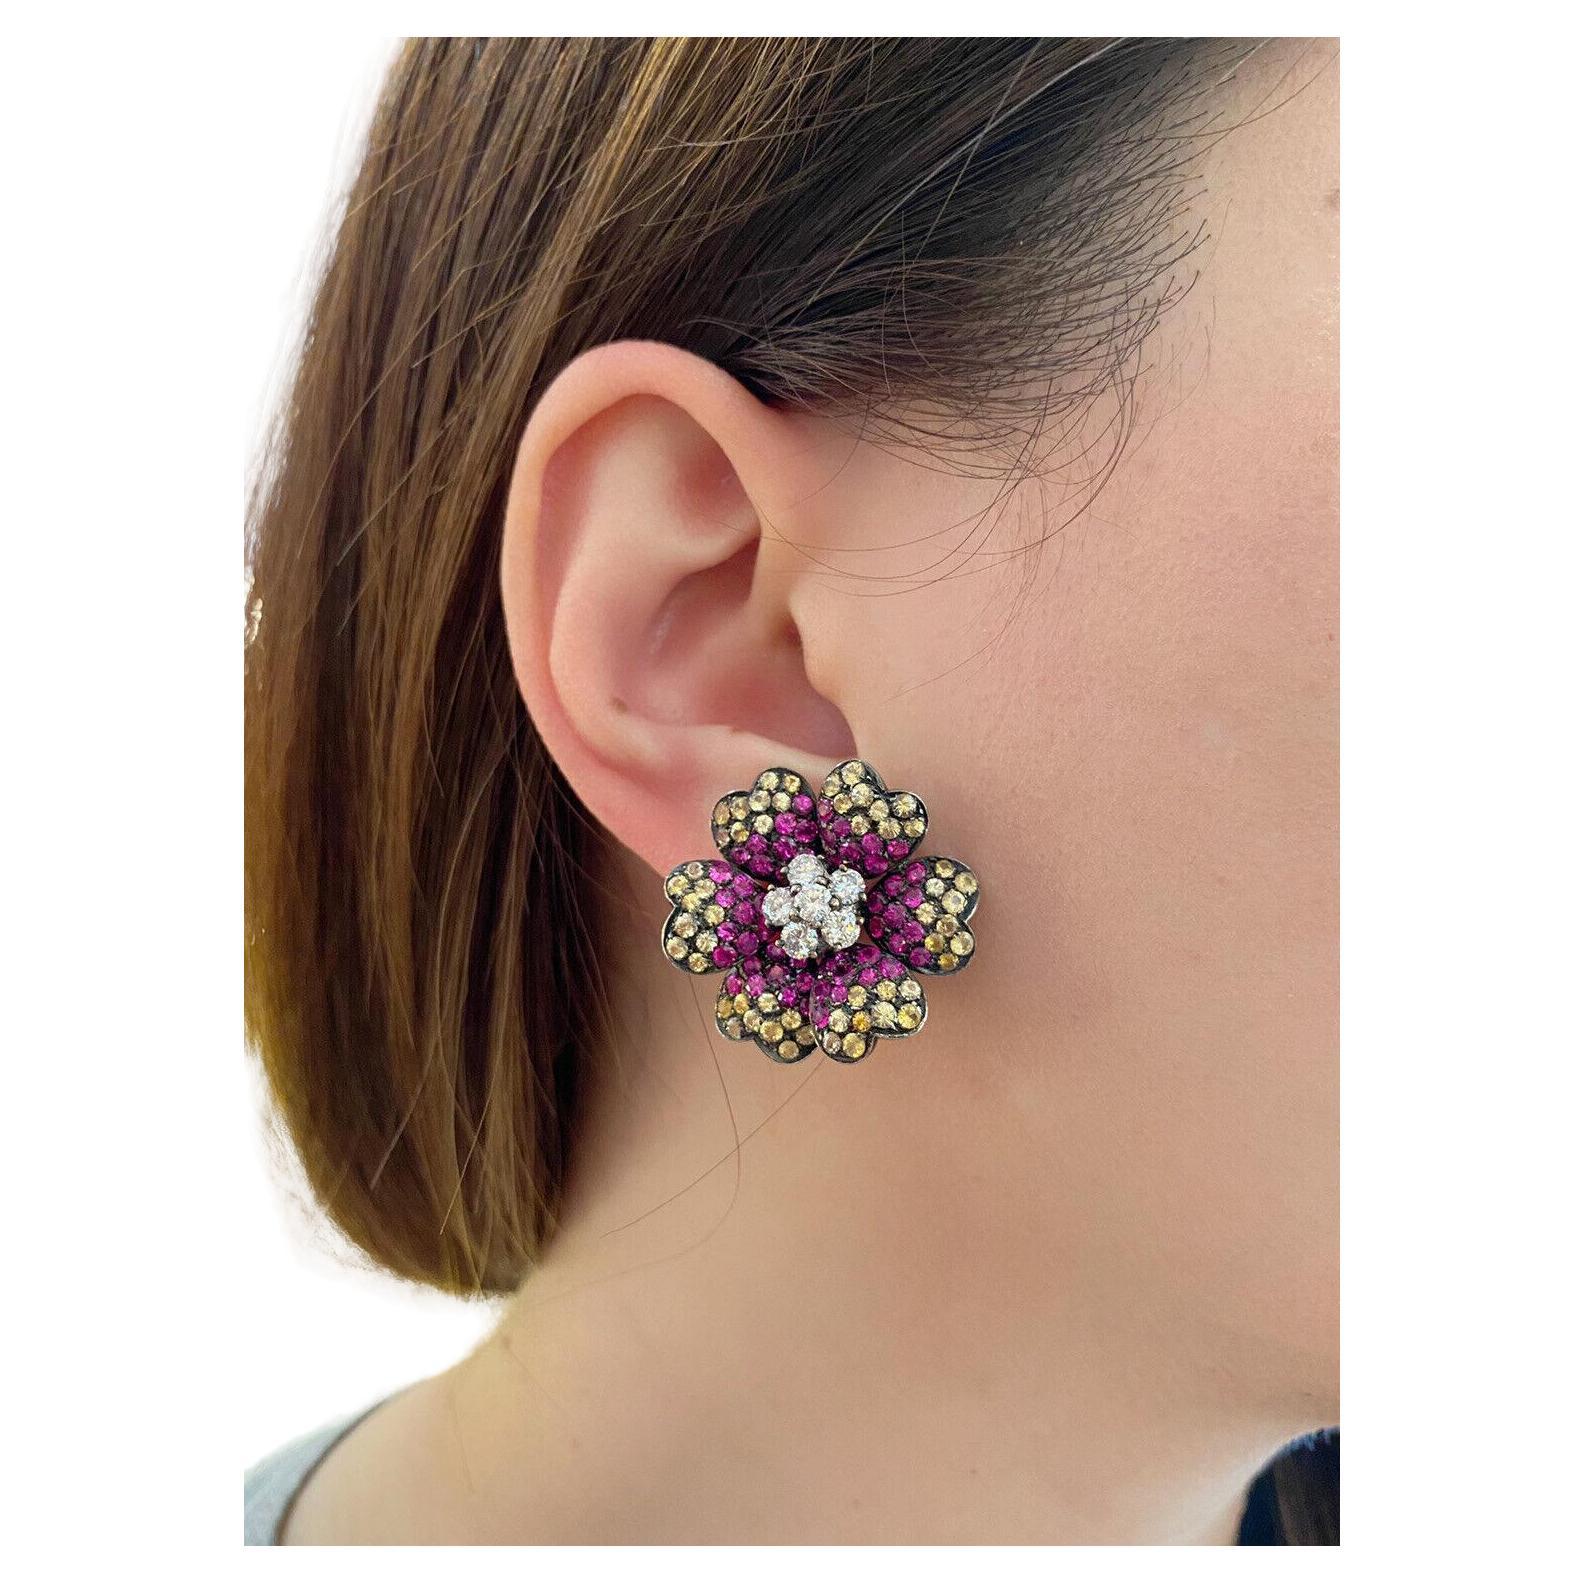 Ruby, Yellow Sapphire and Diamond Flower Earrings in 18k Gold

Ruby, Yellow Sapphire and Diamond Flower Earrings features 6 Round Brilliant Diamonds in the center with Rubies and Yellow Sapphires on the petals set in 18k White Gold in Black Rhodium.